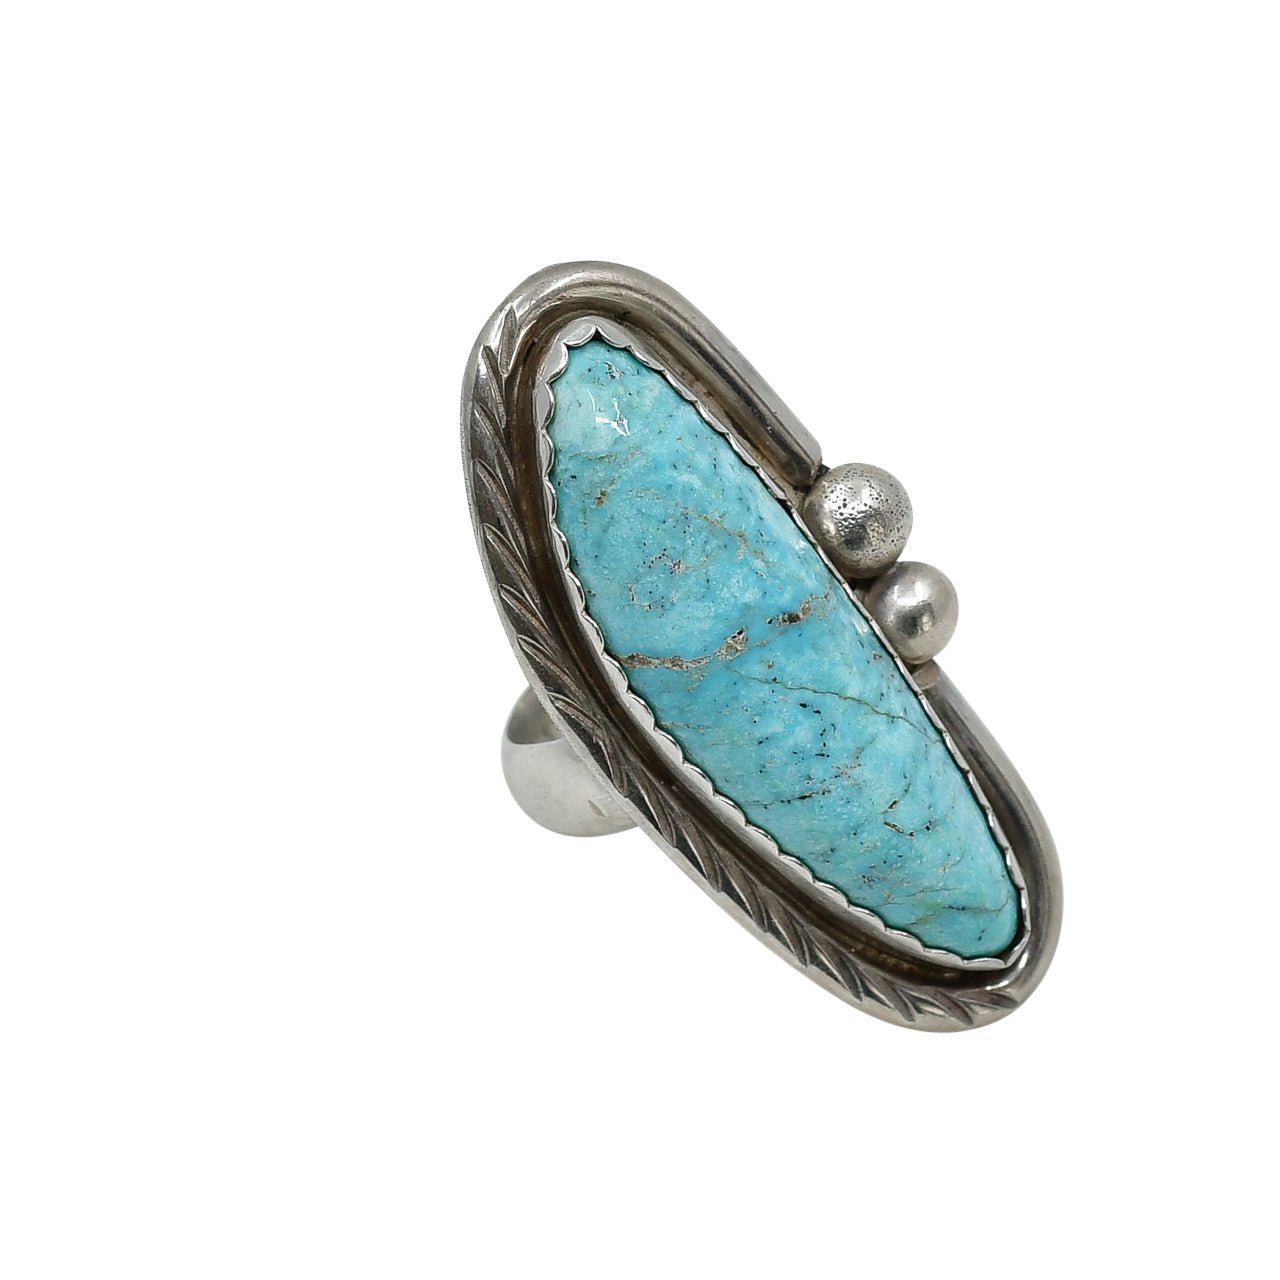 Vintage Navajo Ring With Elongated Turquoise Stone